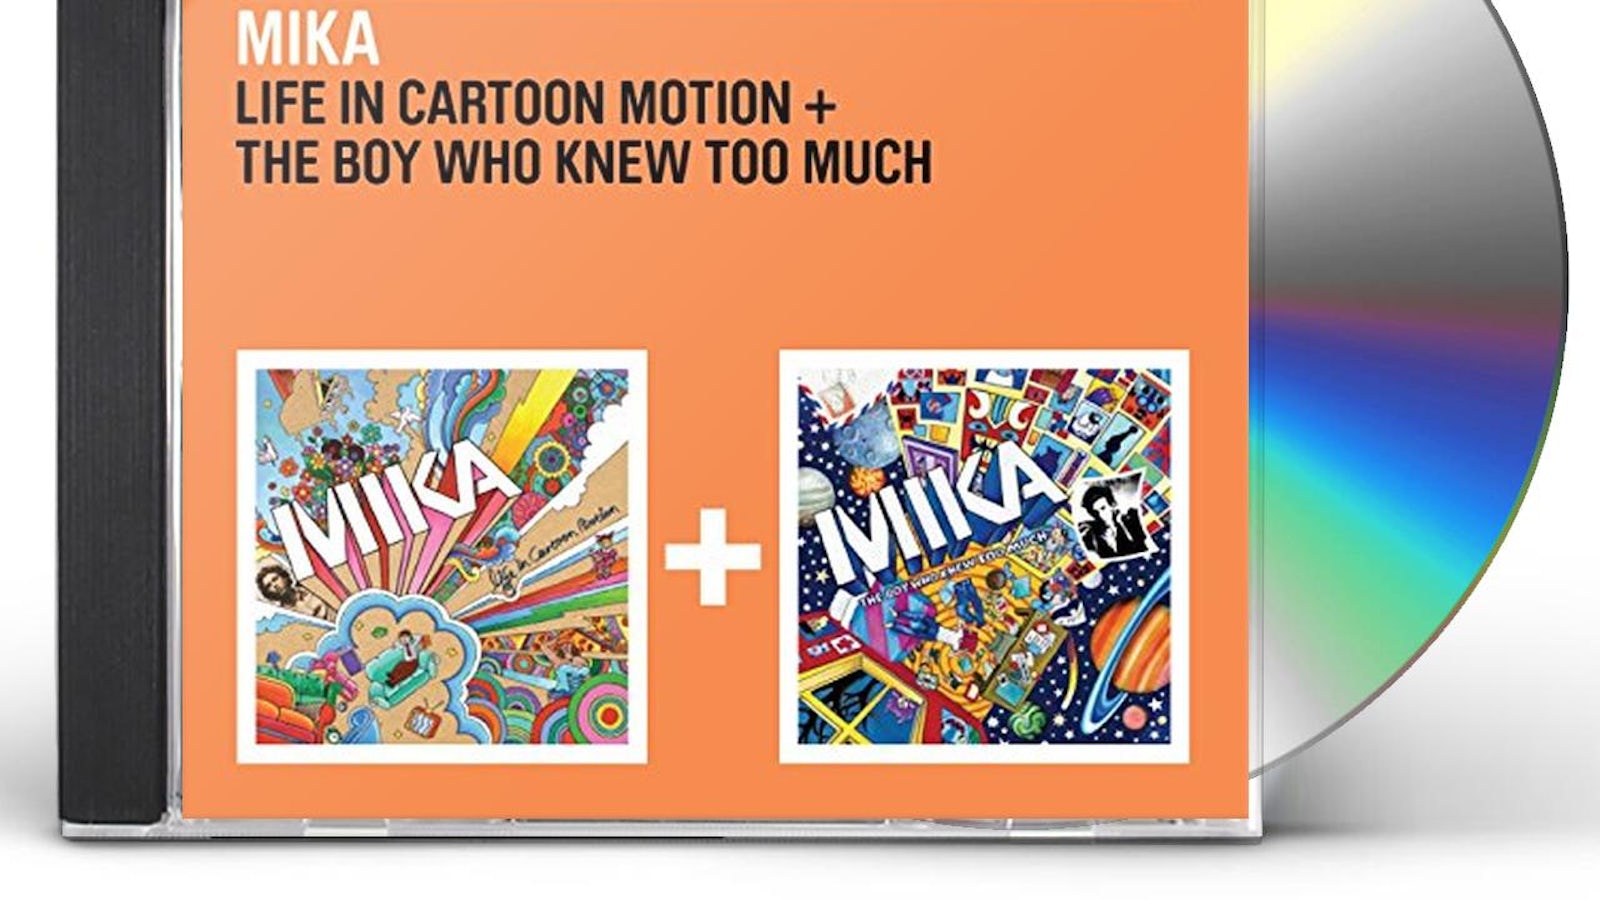 MIKA LIFE IN CARTOON MOTION / BOY WHO KNEW TOO MUCH CD